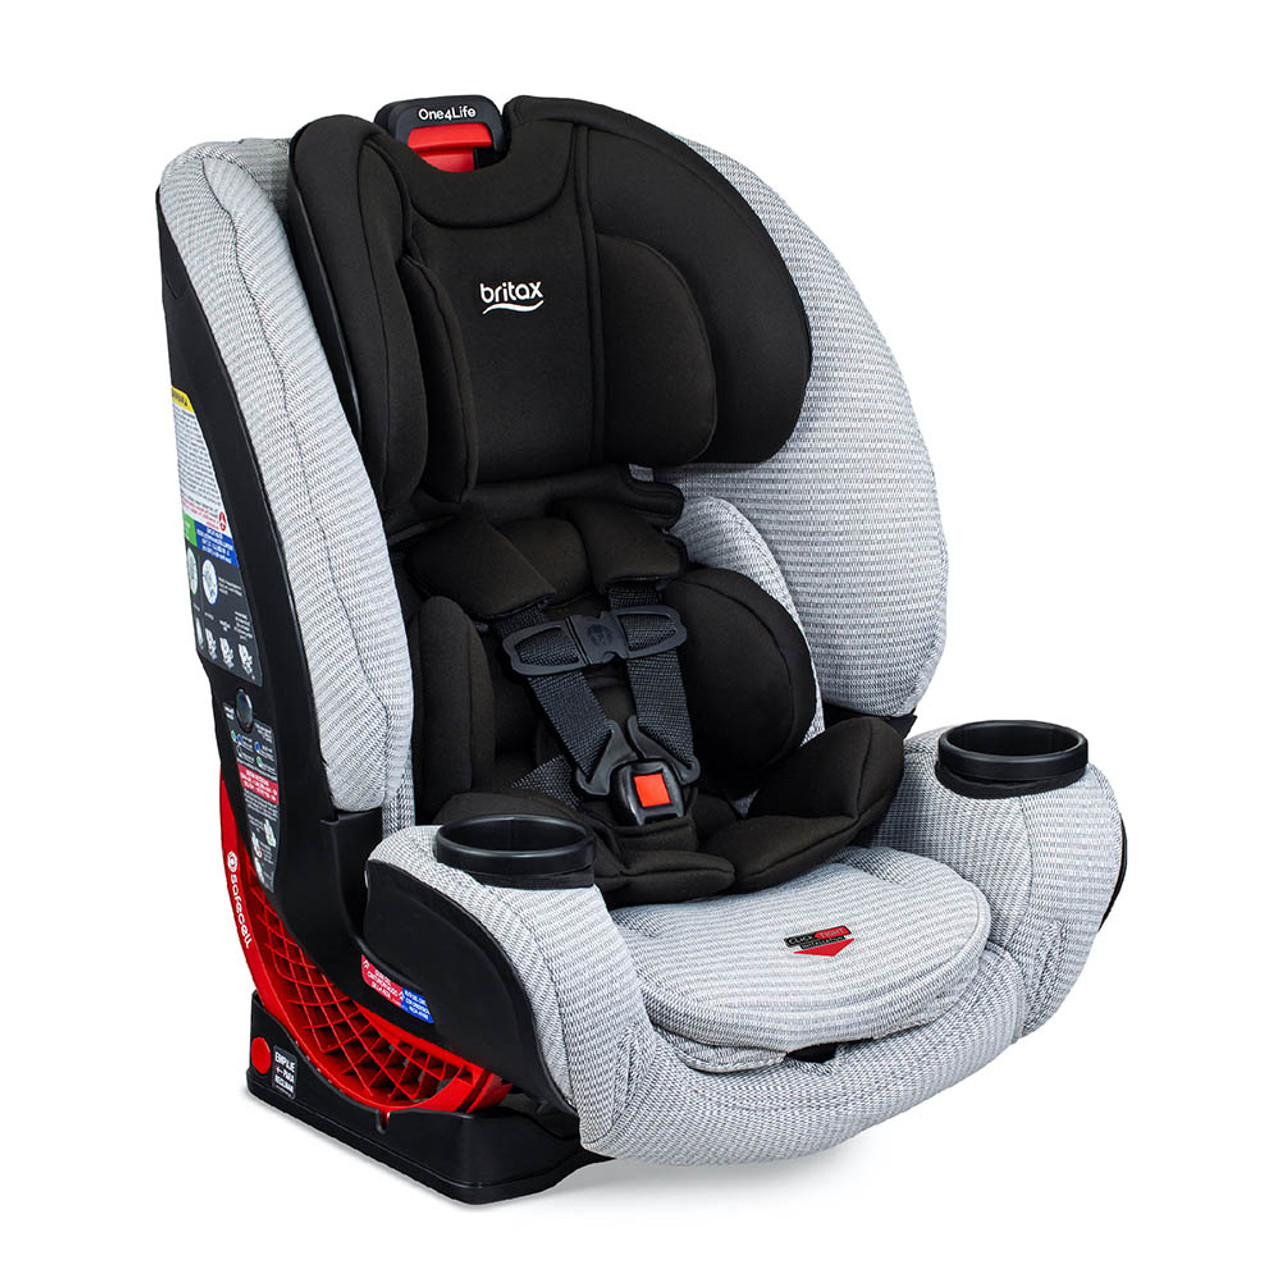 How to Clean a Baby Car Seat